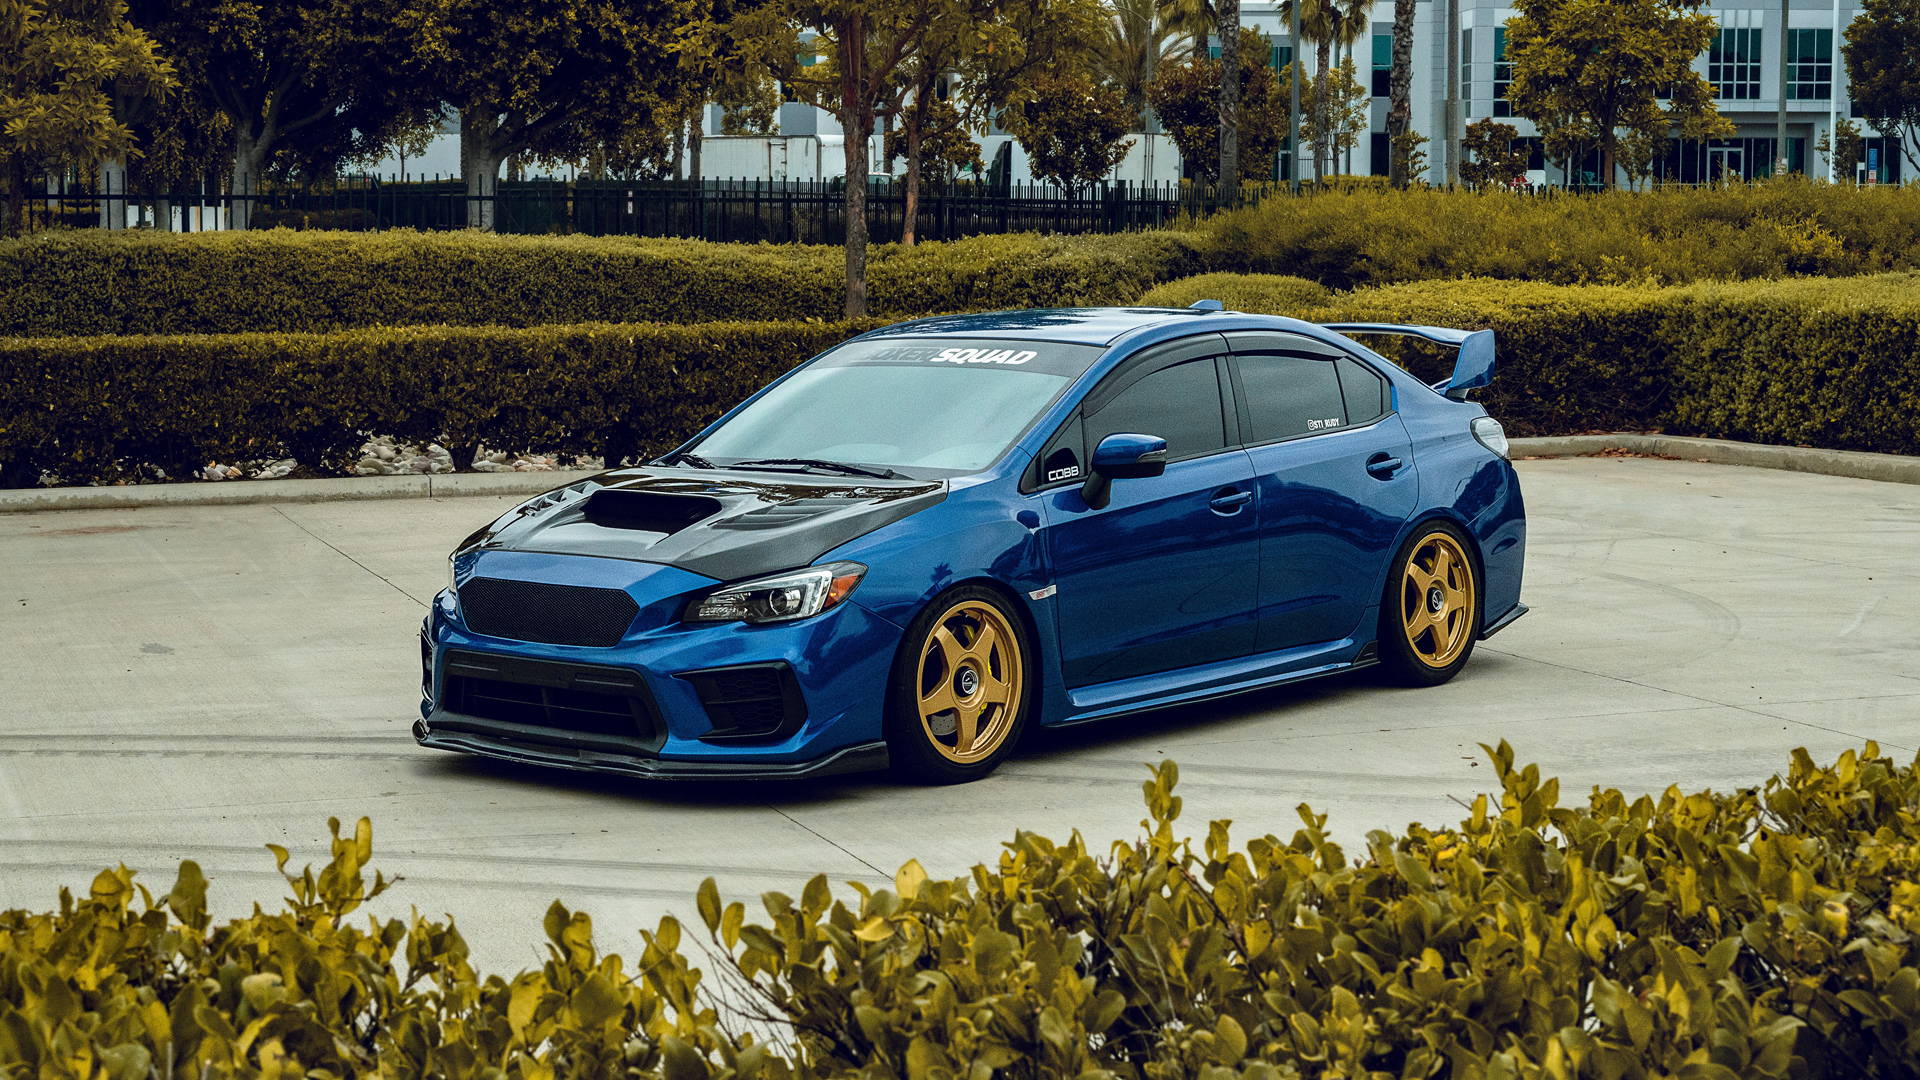 STI Wheel Simulator lets you check which rims look best on your Subaru